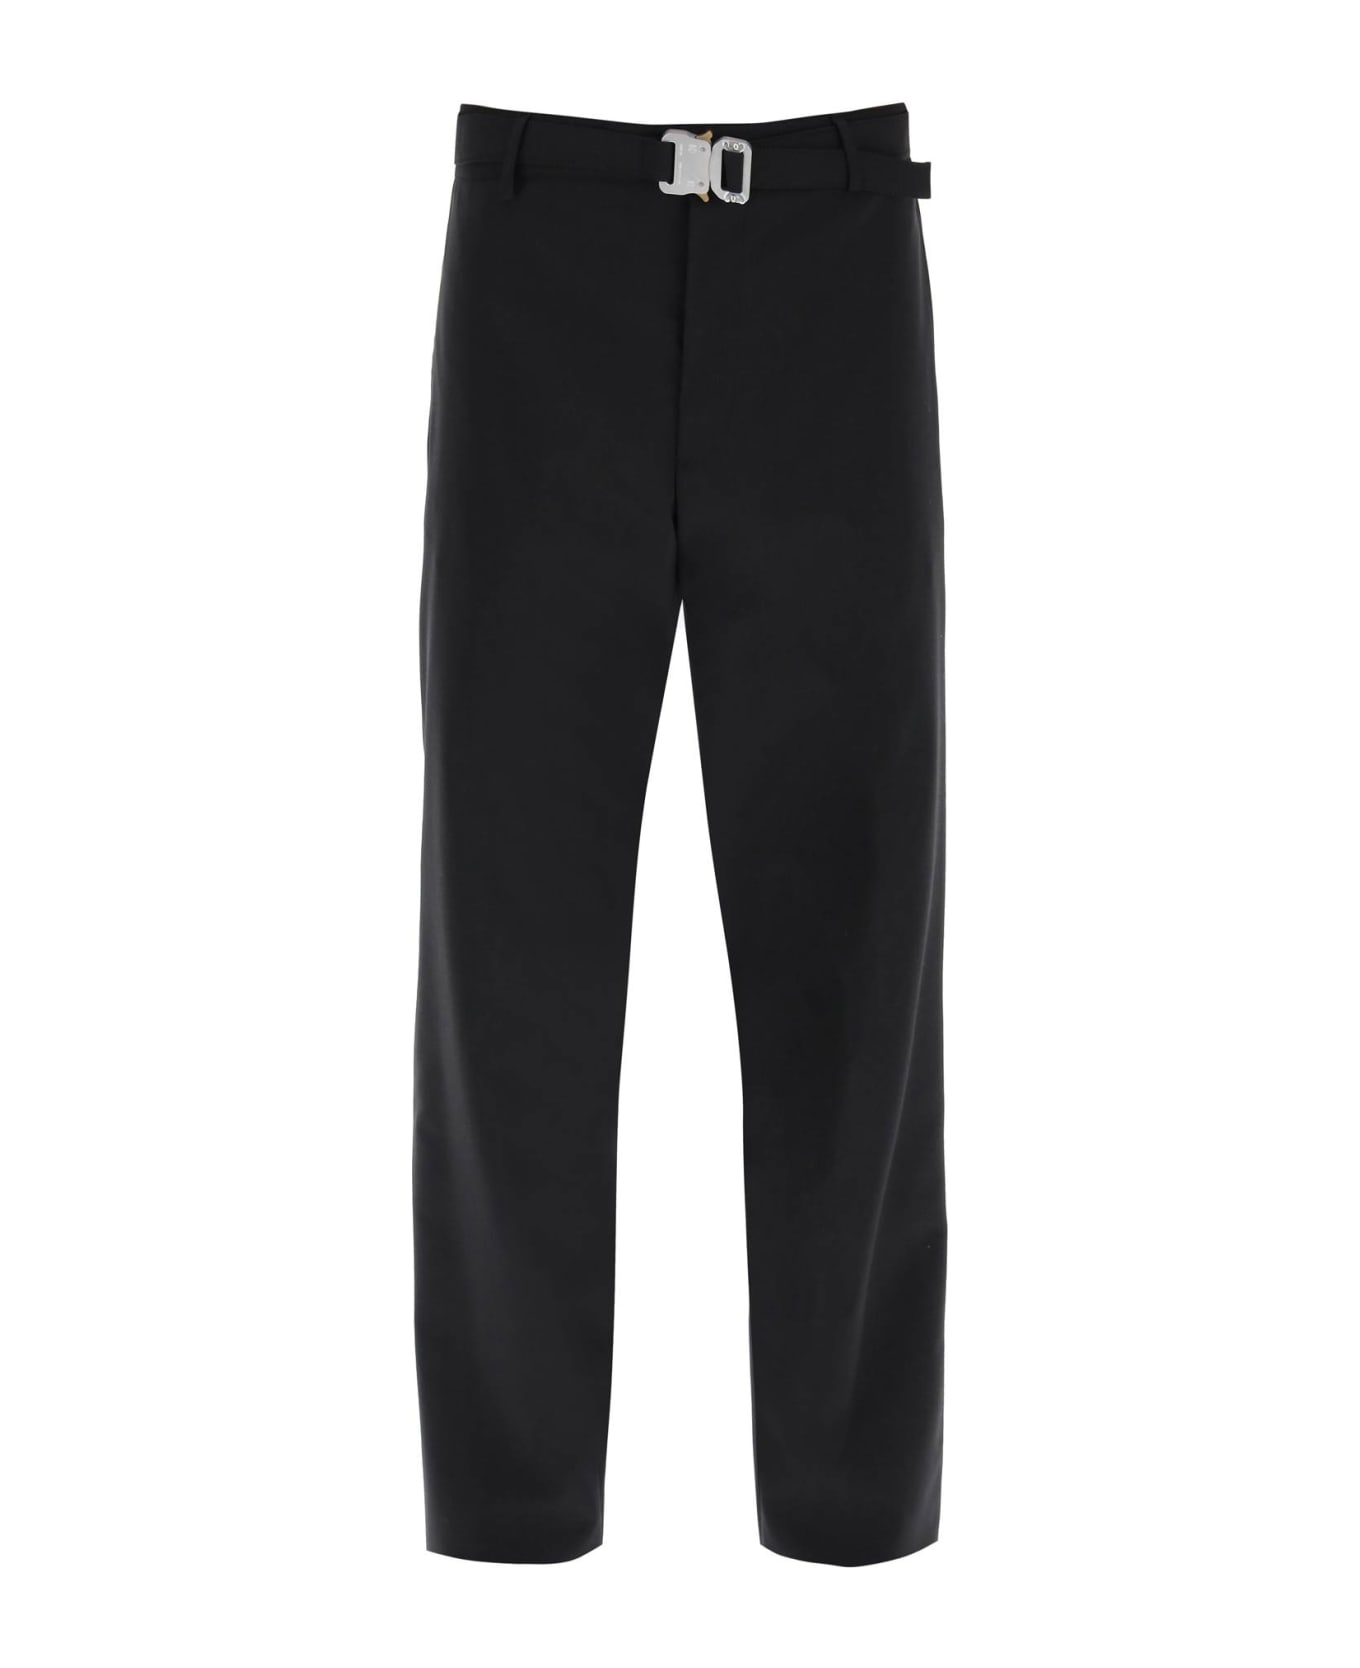 1017 ALYX 9SM Pants With Built-in Belt And Parachute Buckle - BLACK (Black)